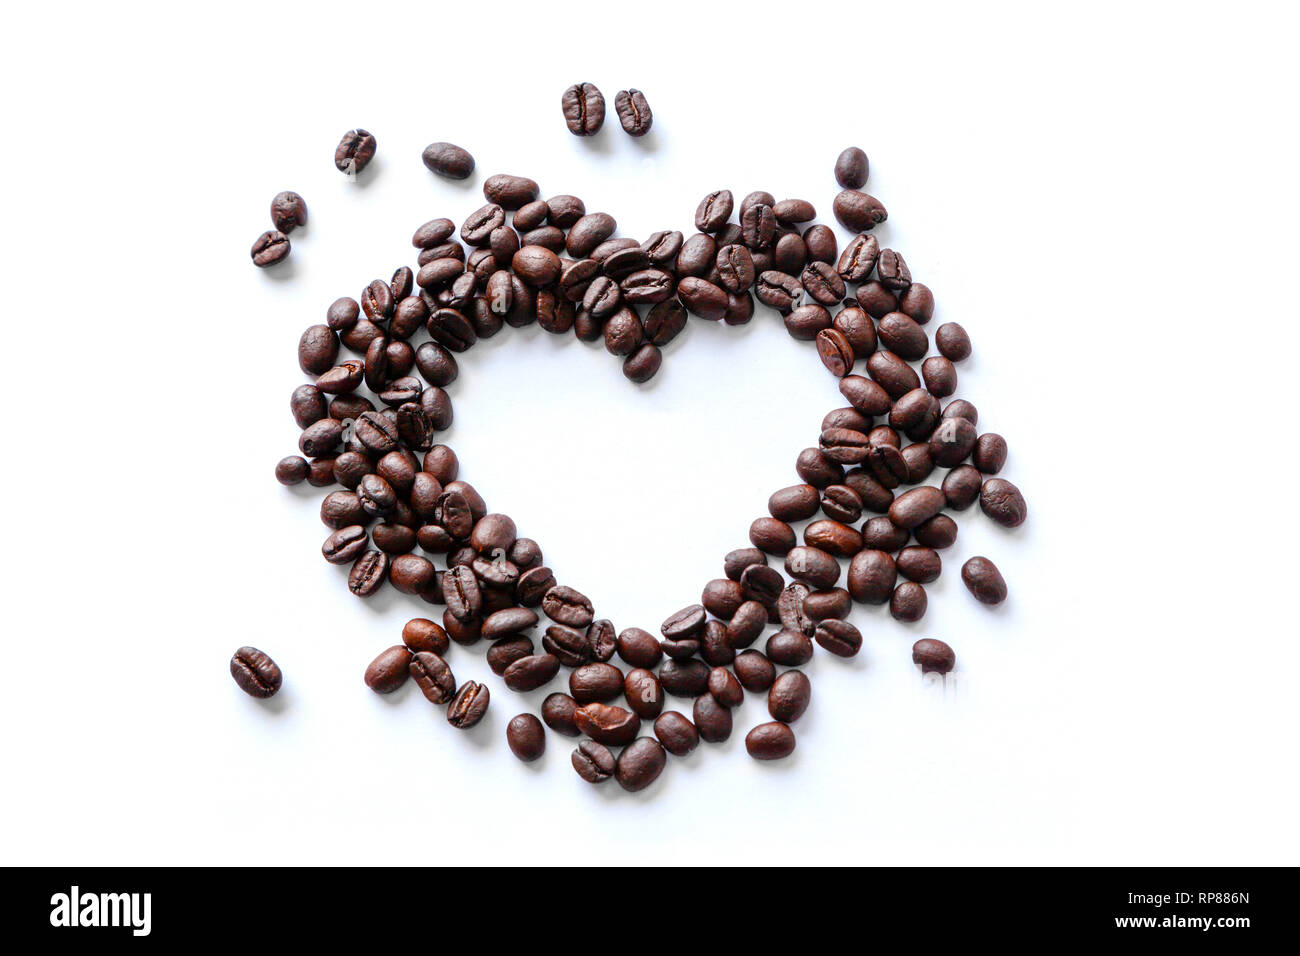 Love of coffee expressed in spilled coffee beans in the shape of a heart isolated on white background Stock Photo